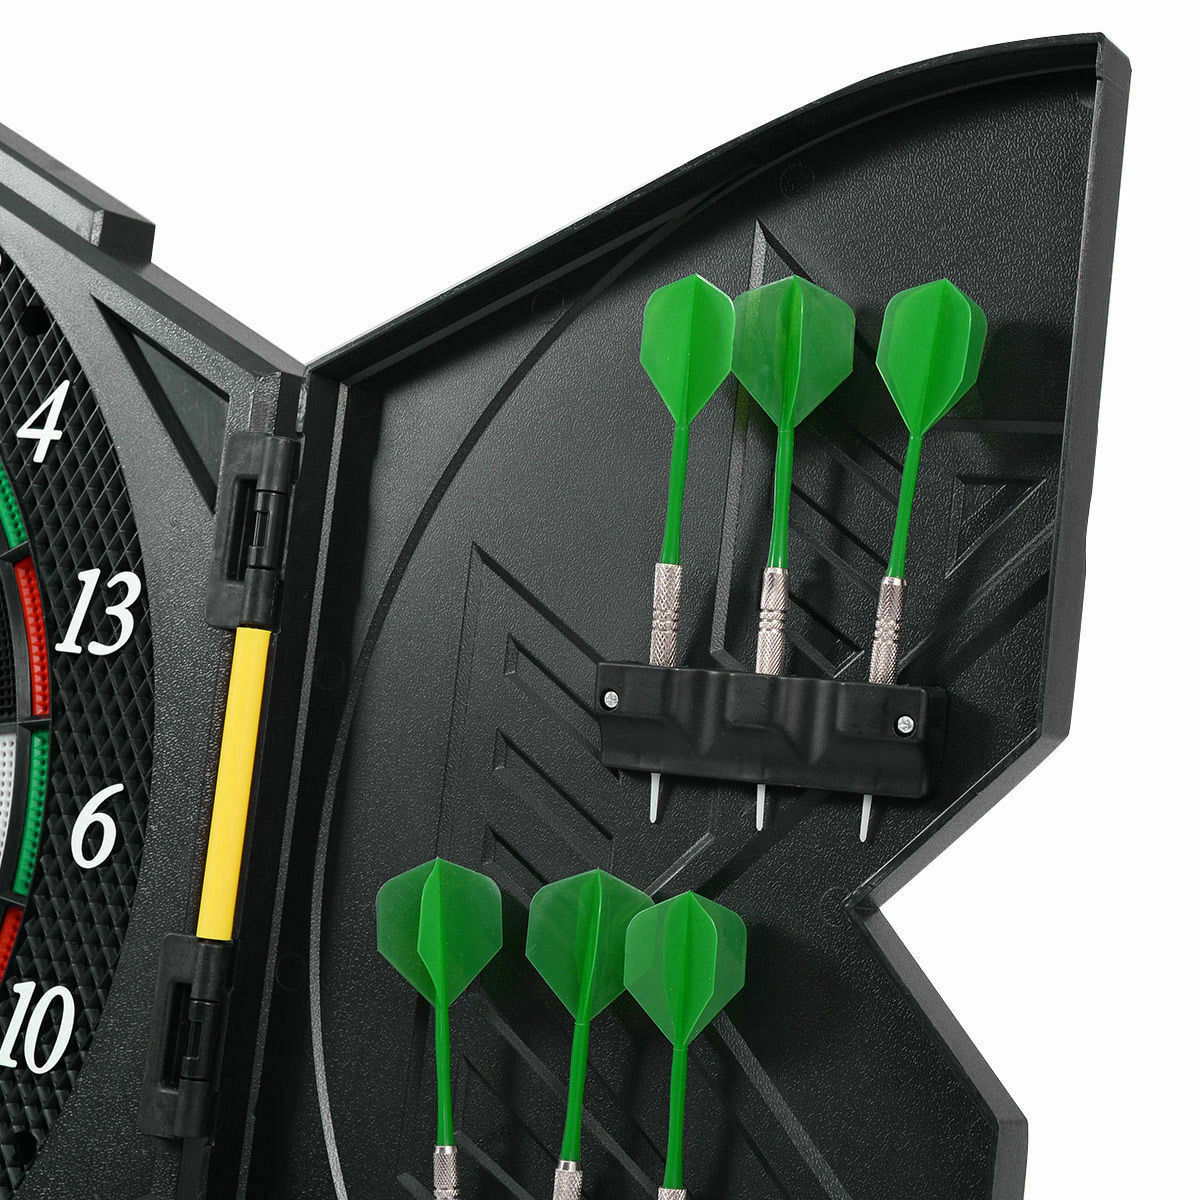 Professional Complete Electronic Dart Board Cabinet Set